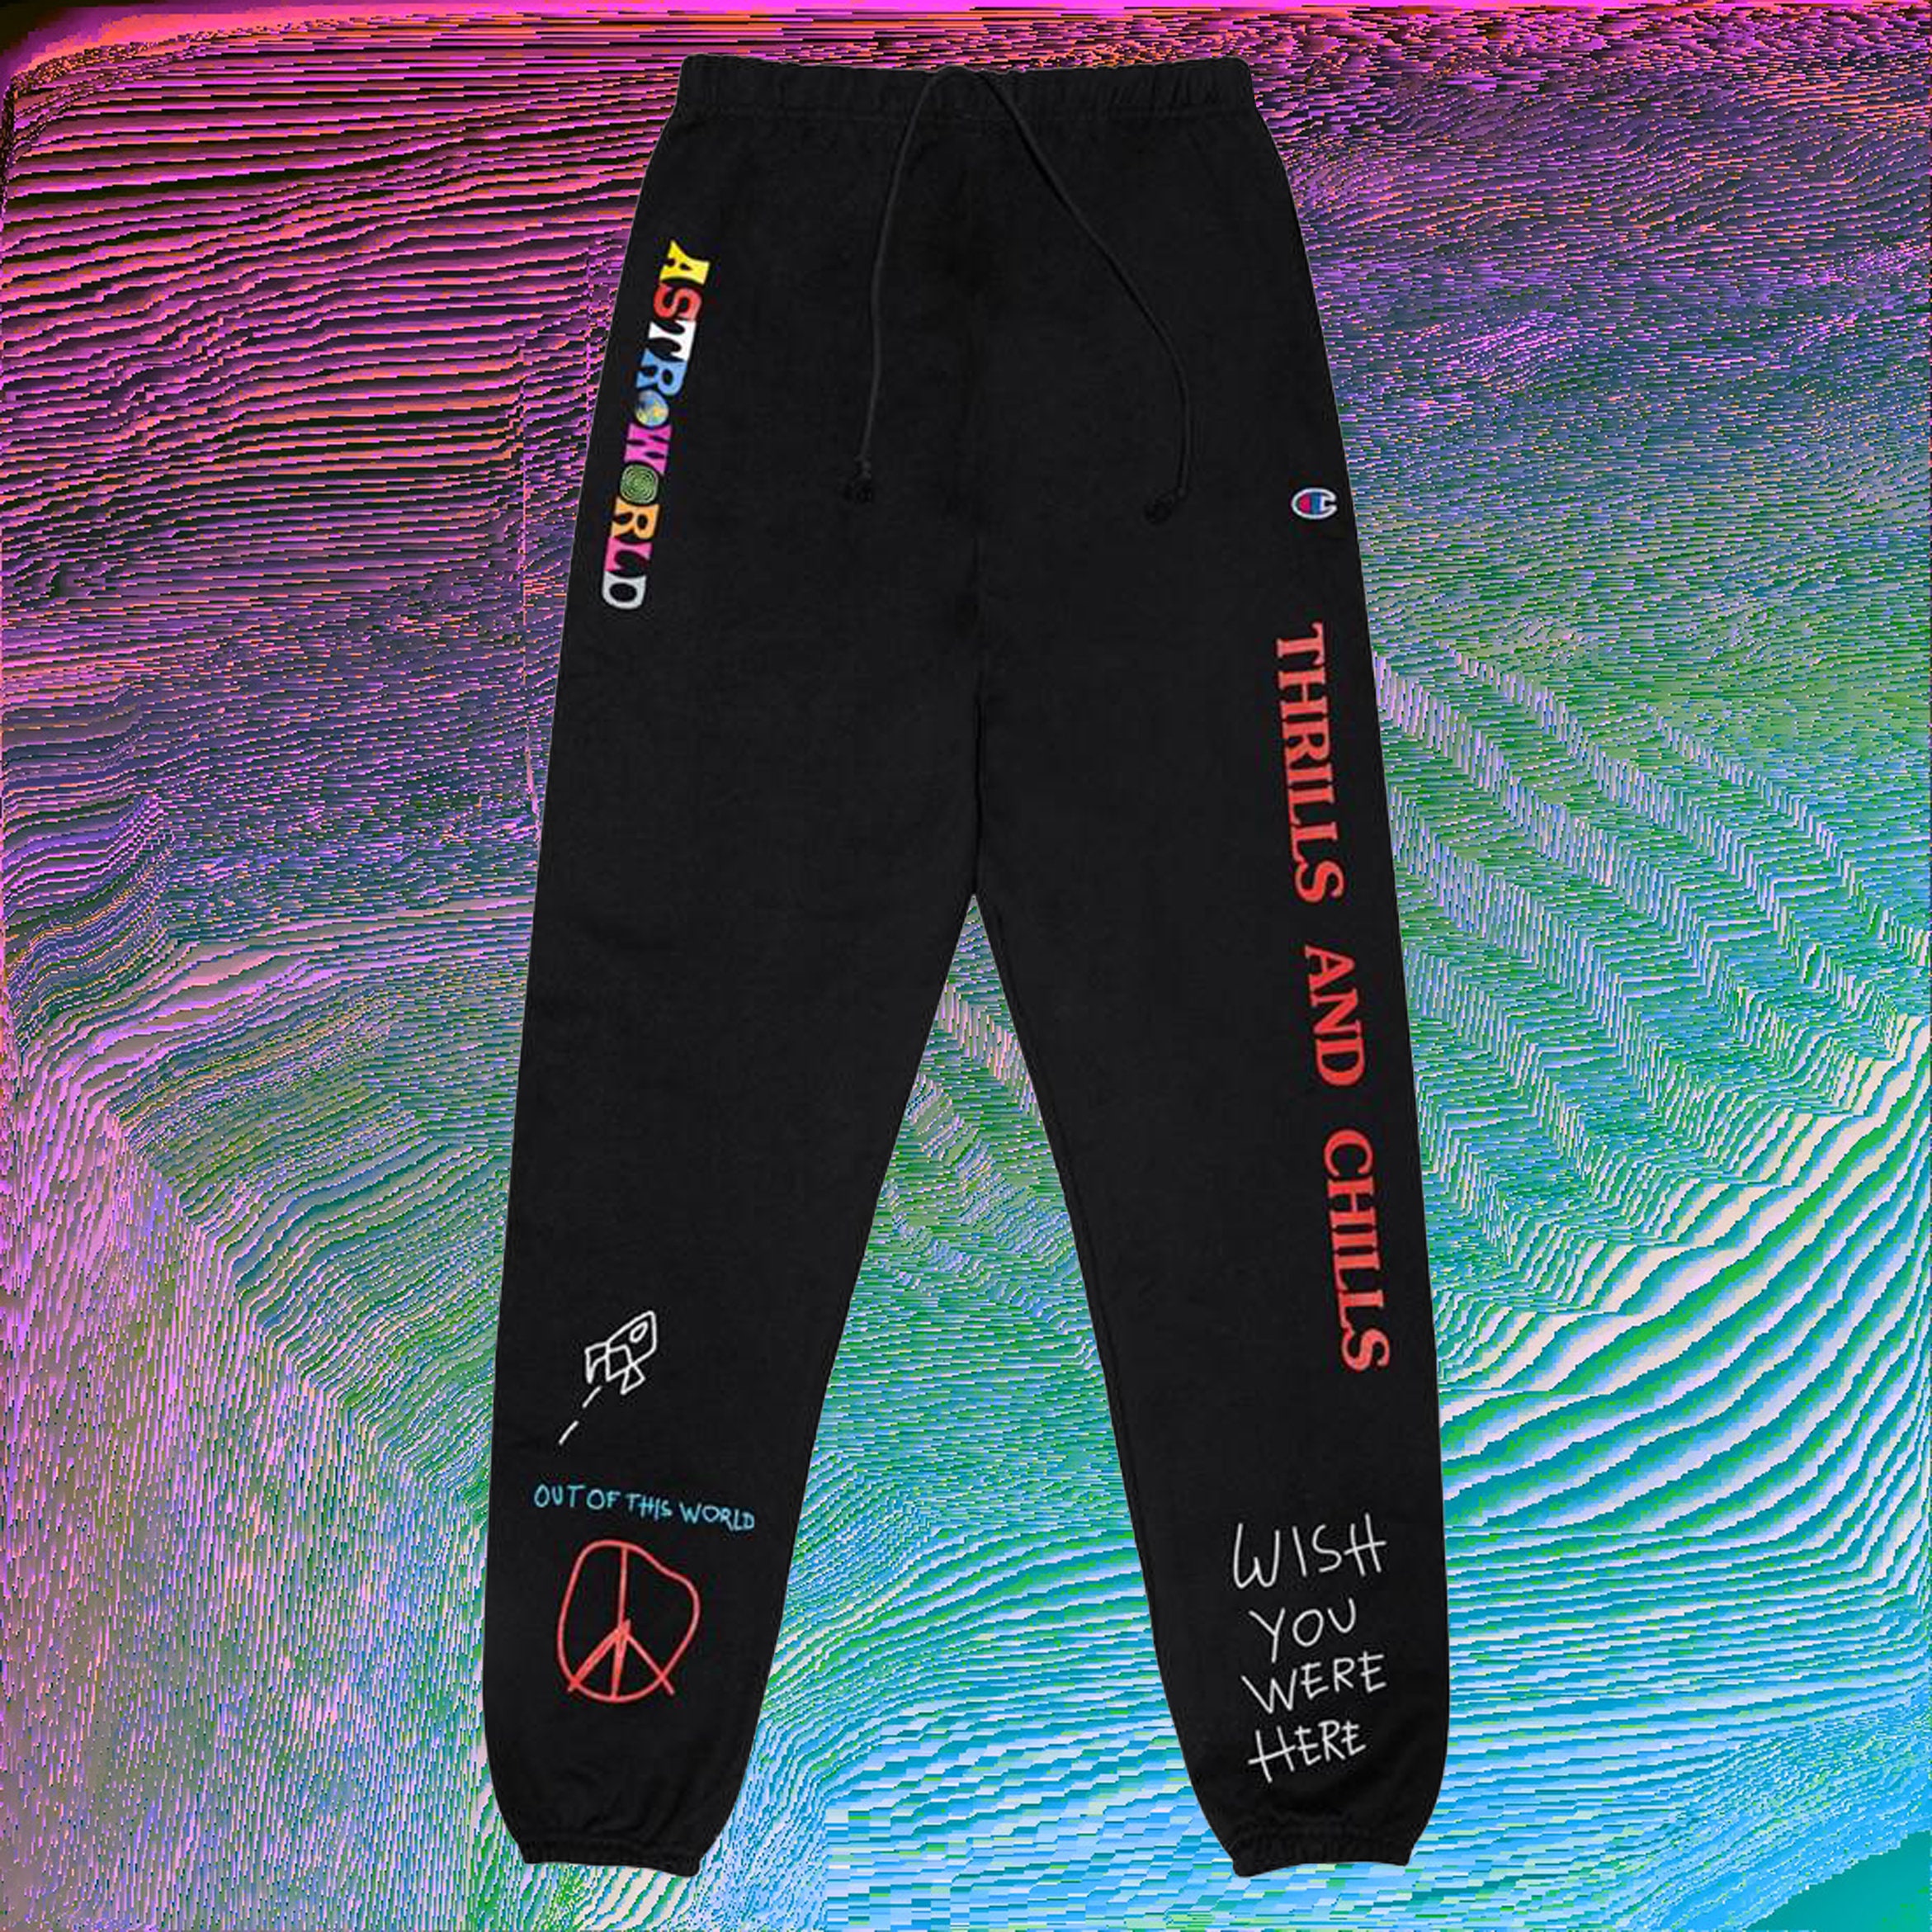 Astroworld Champion Fleece Joger Pant Travis Scott Out Of This | Etsy